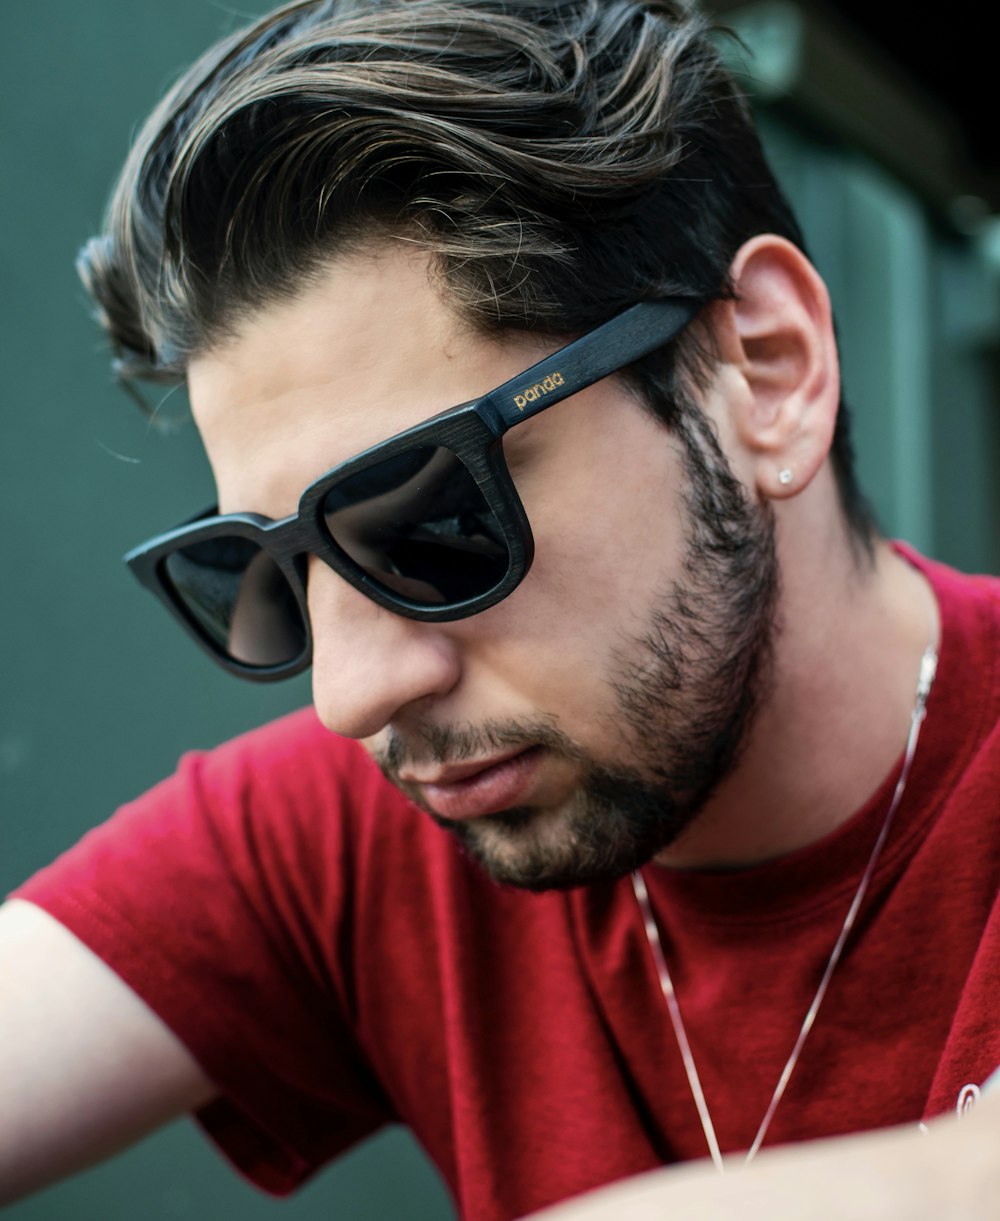 man wearing black sunglasses and red shirt